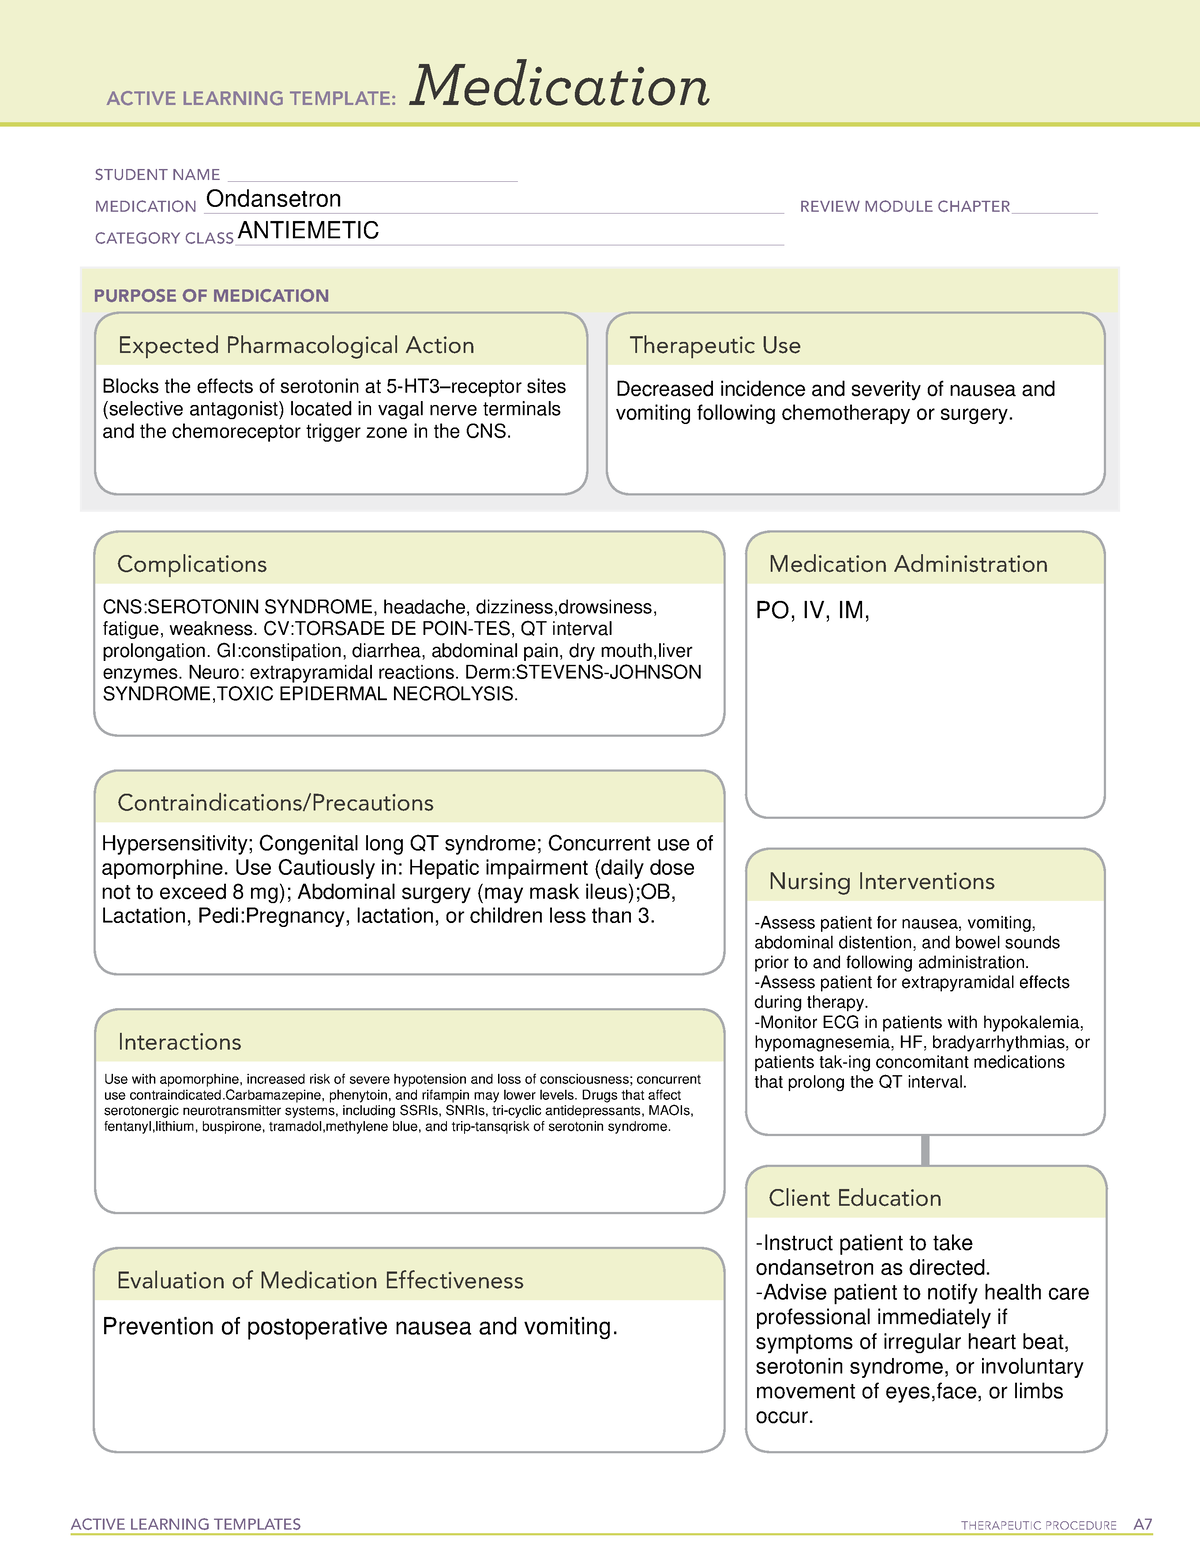 Ondansetron ATI Template ACTIVE LEARNING TEMPLATES THERAPEUTIC